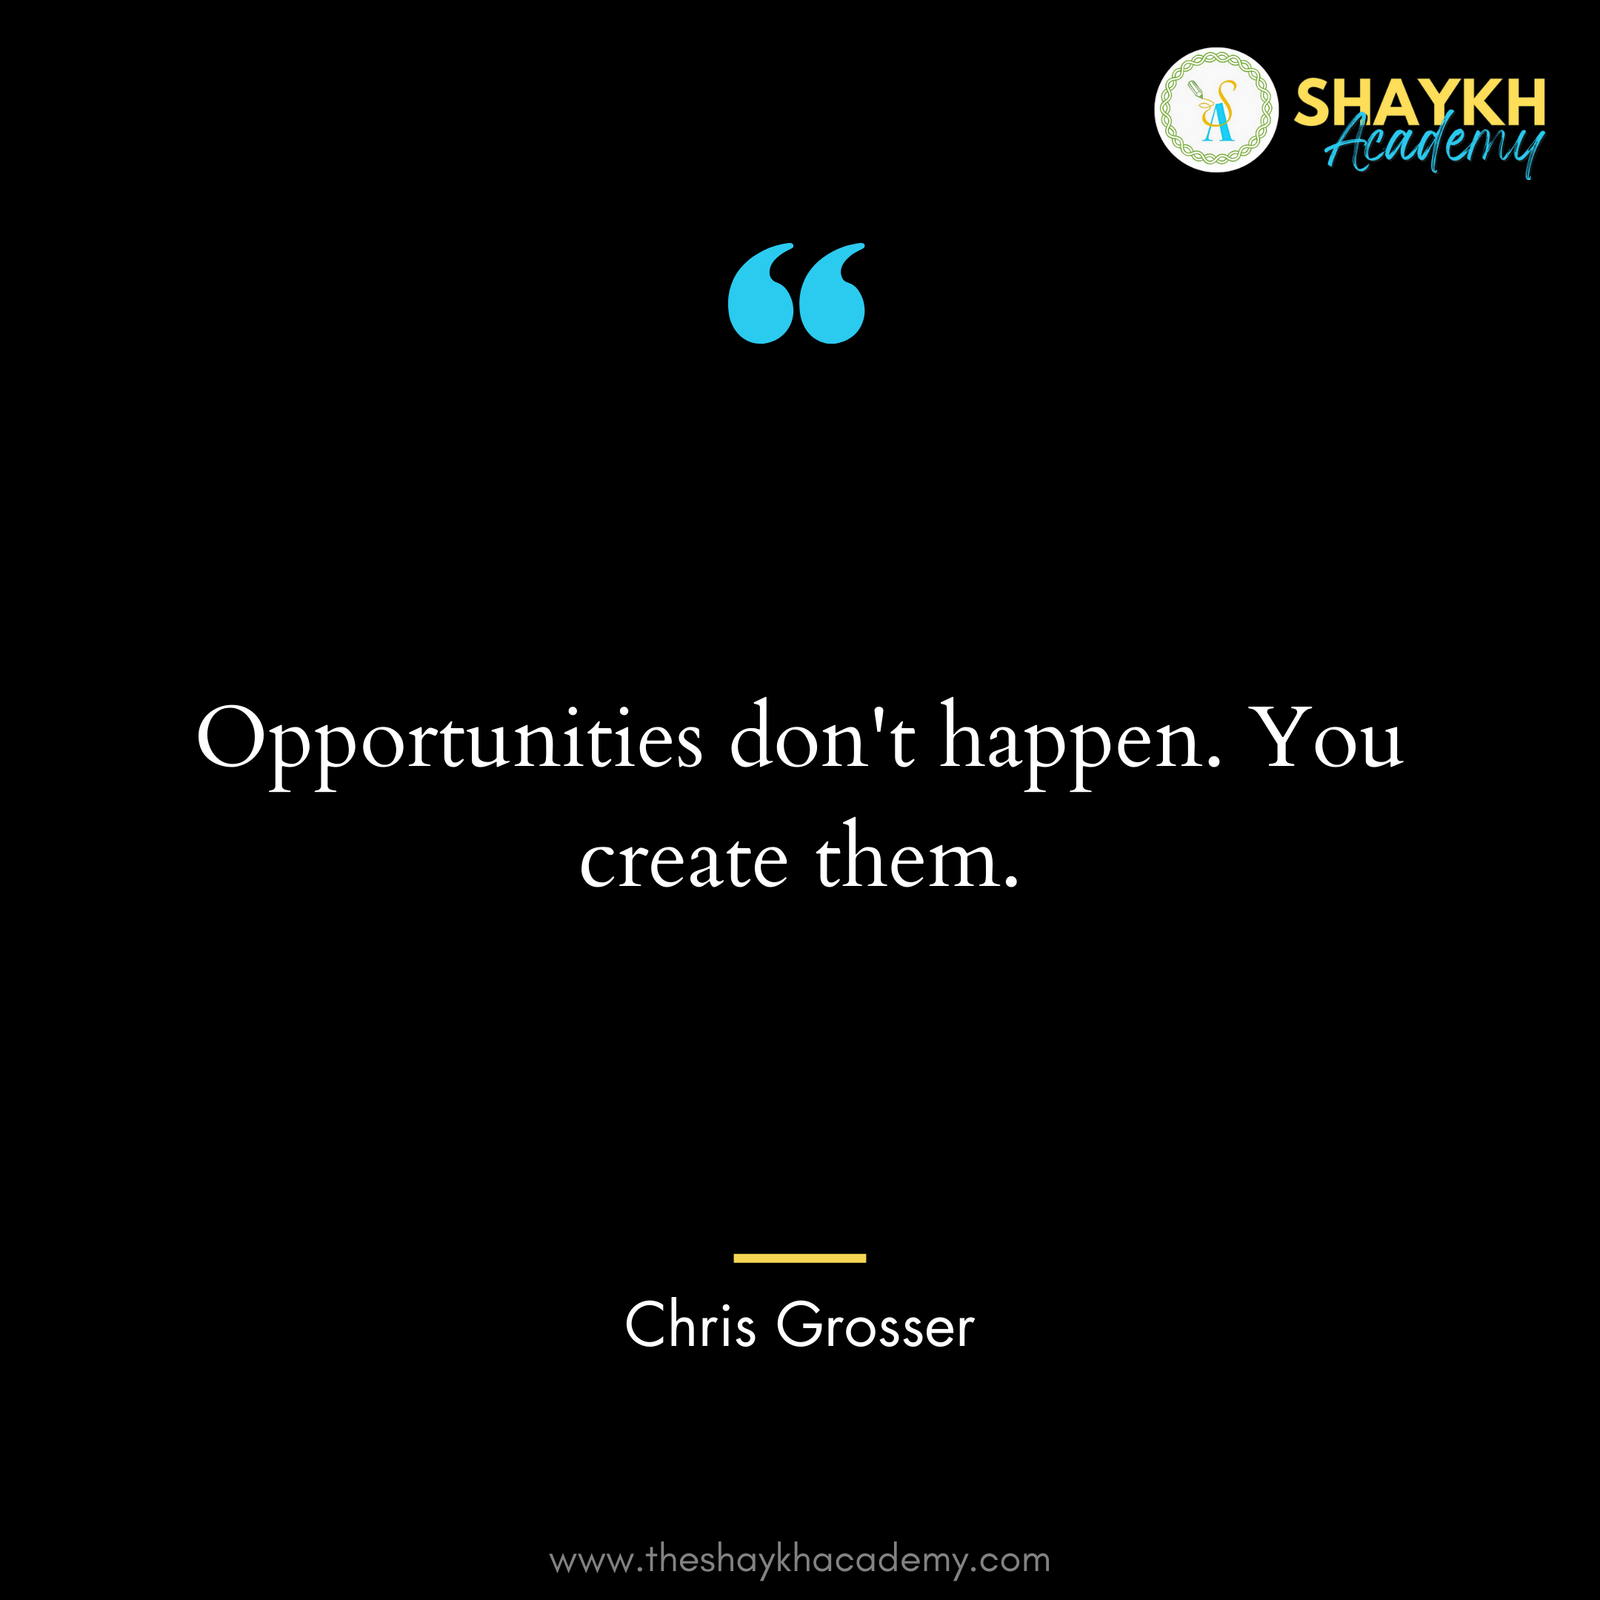 Opportunities don't happen. You create them